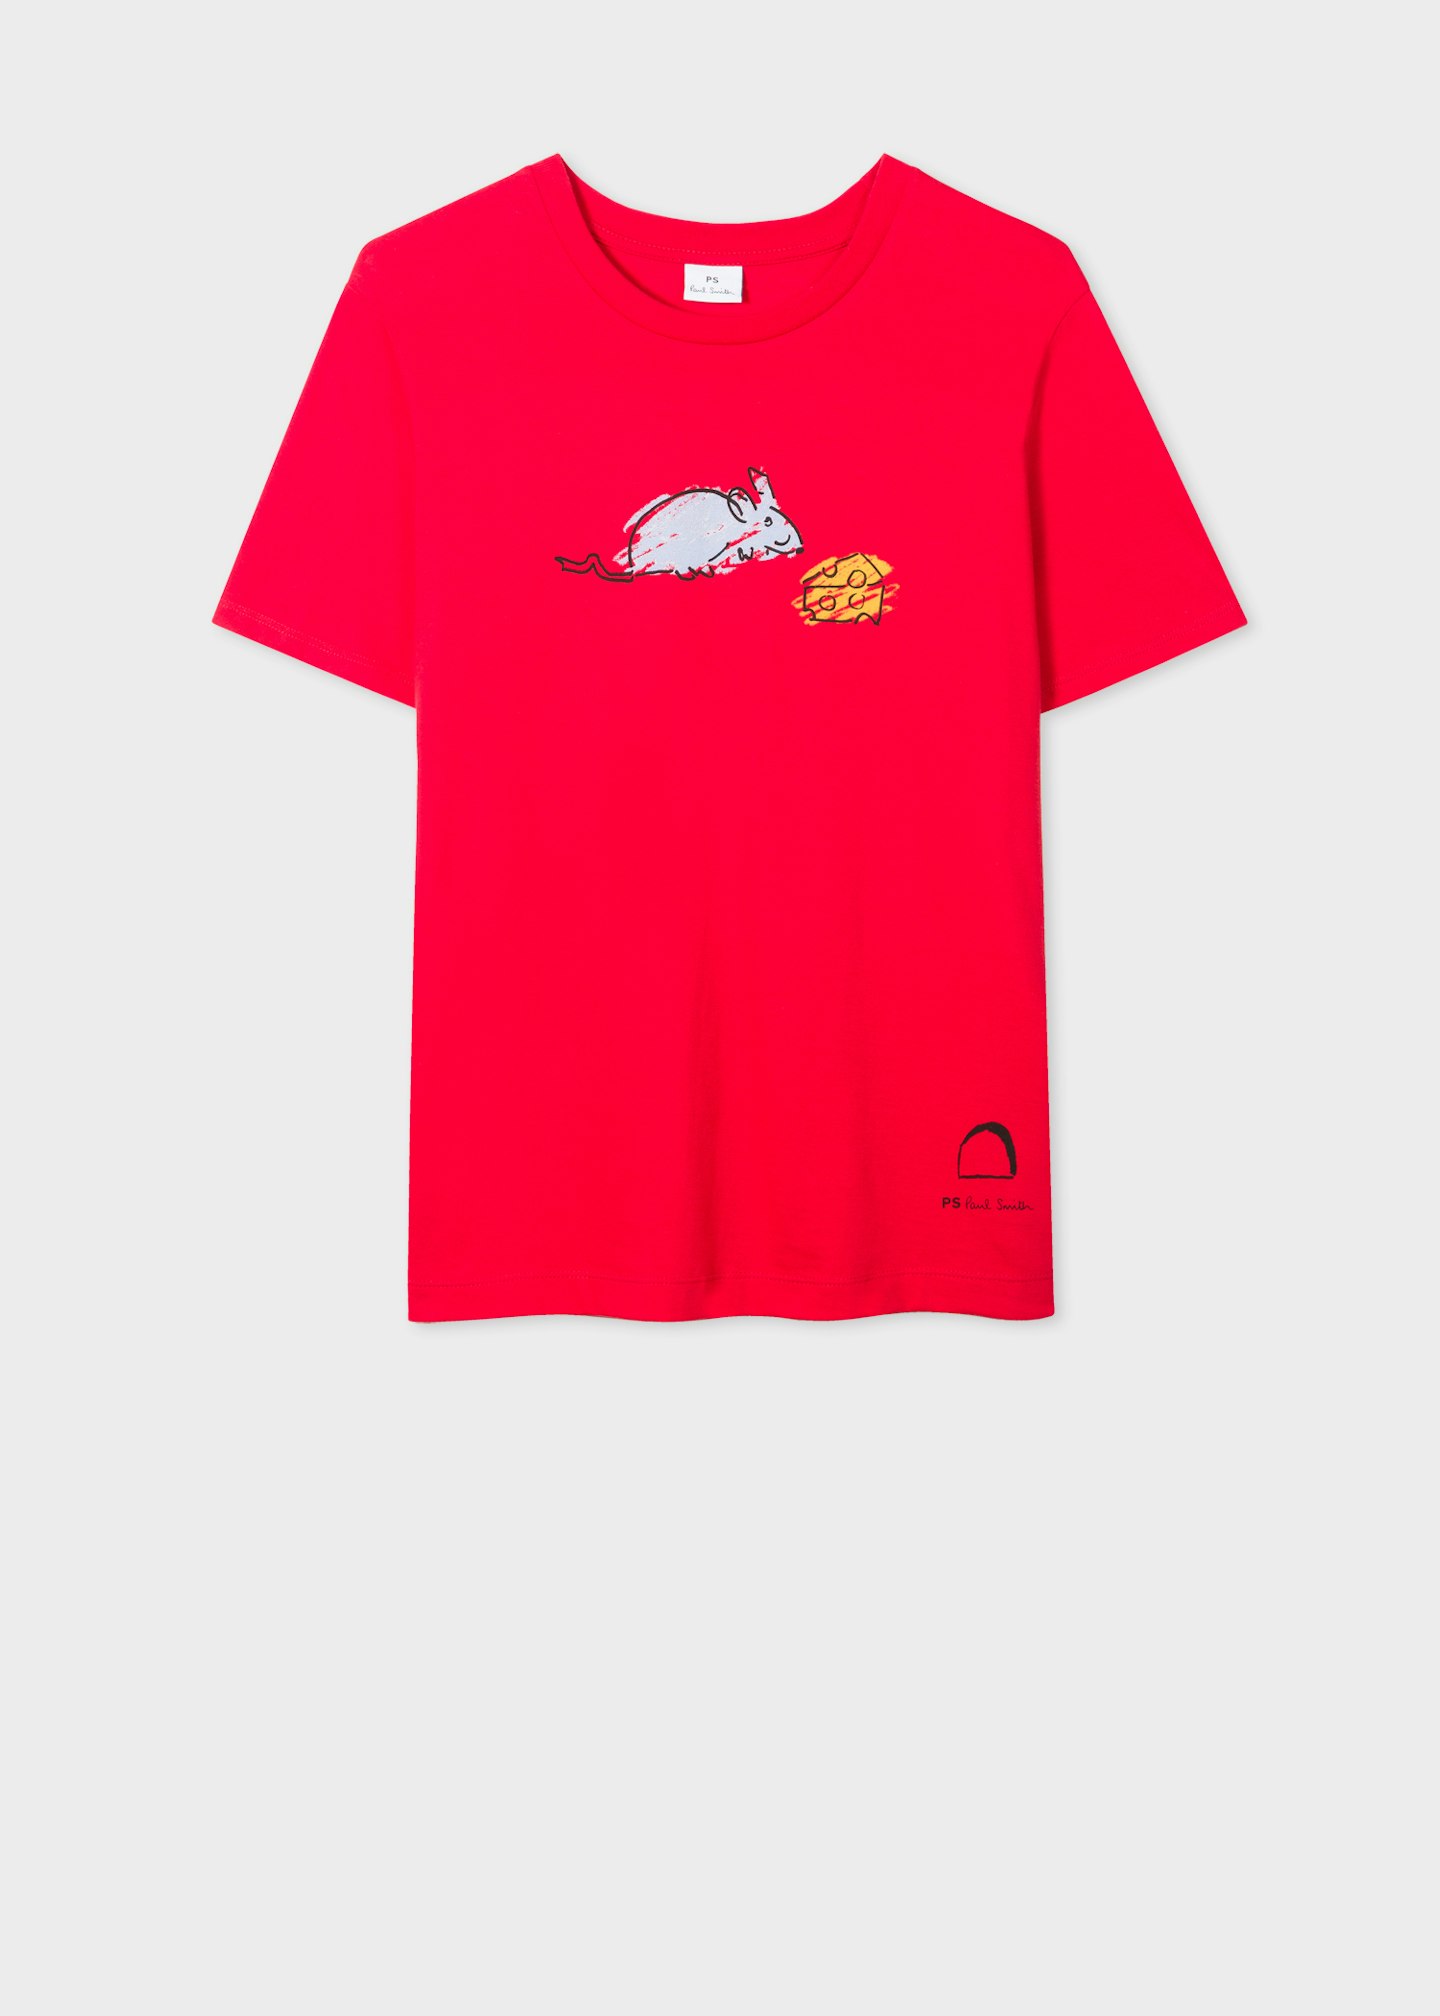 Paul Smith, Red 'Year Of The Rat' Print Cotton T-Shirt, £65